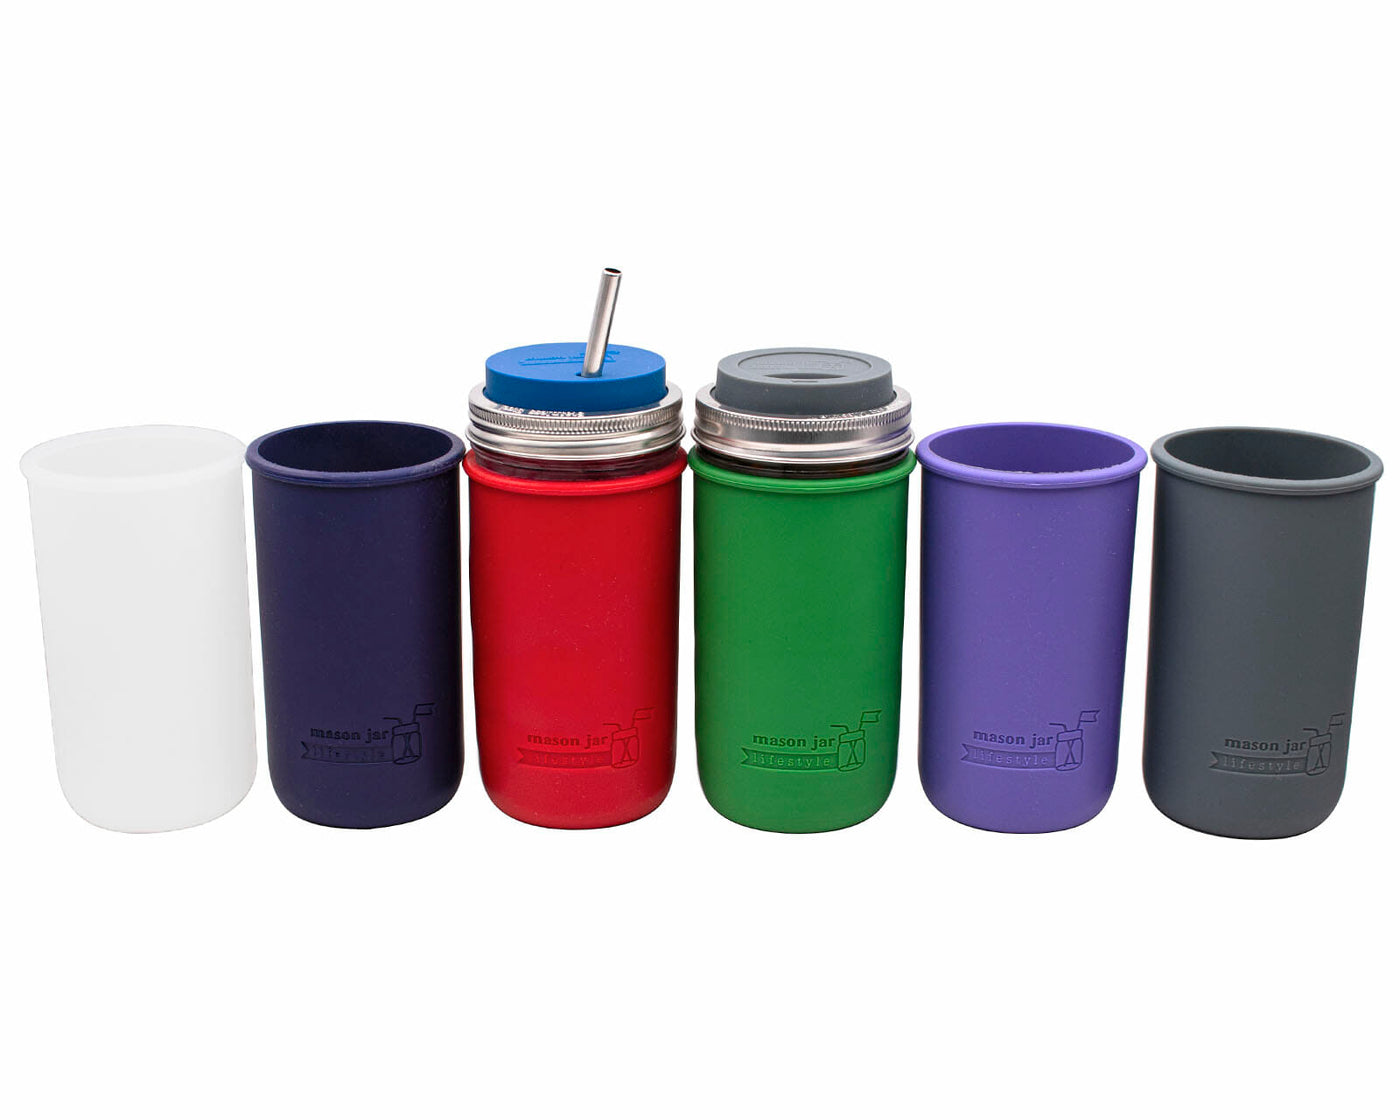 24oz Tumbler Cup w/ Silicone Lid & Sleeve